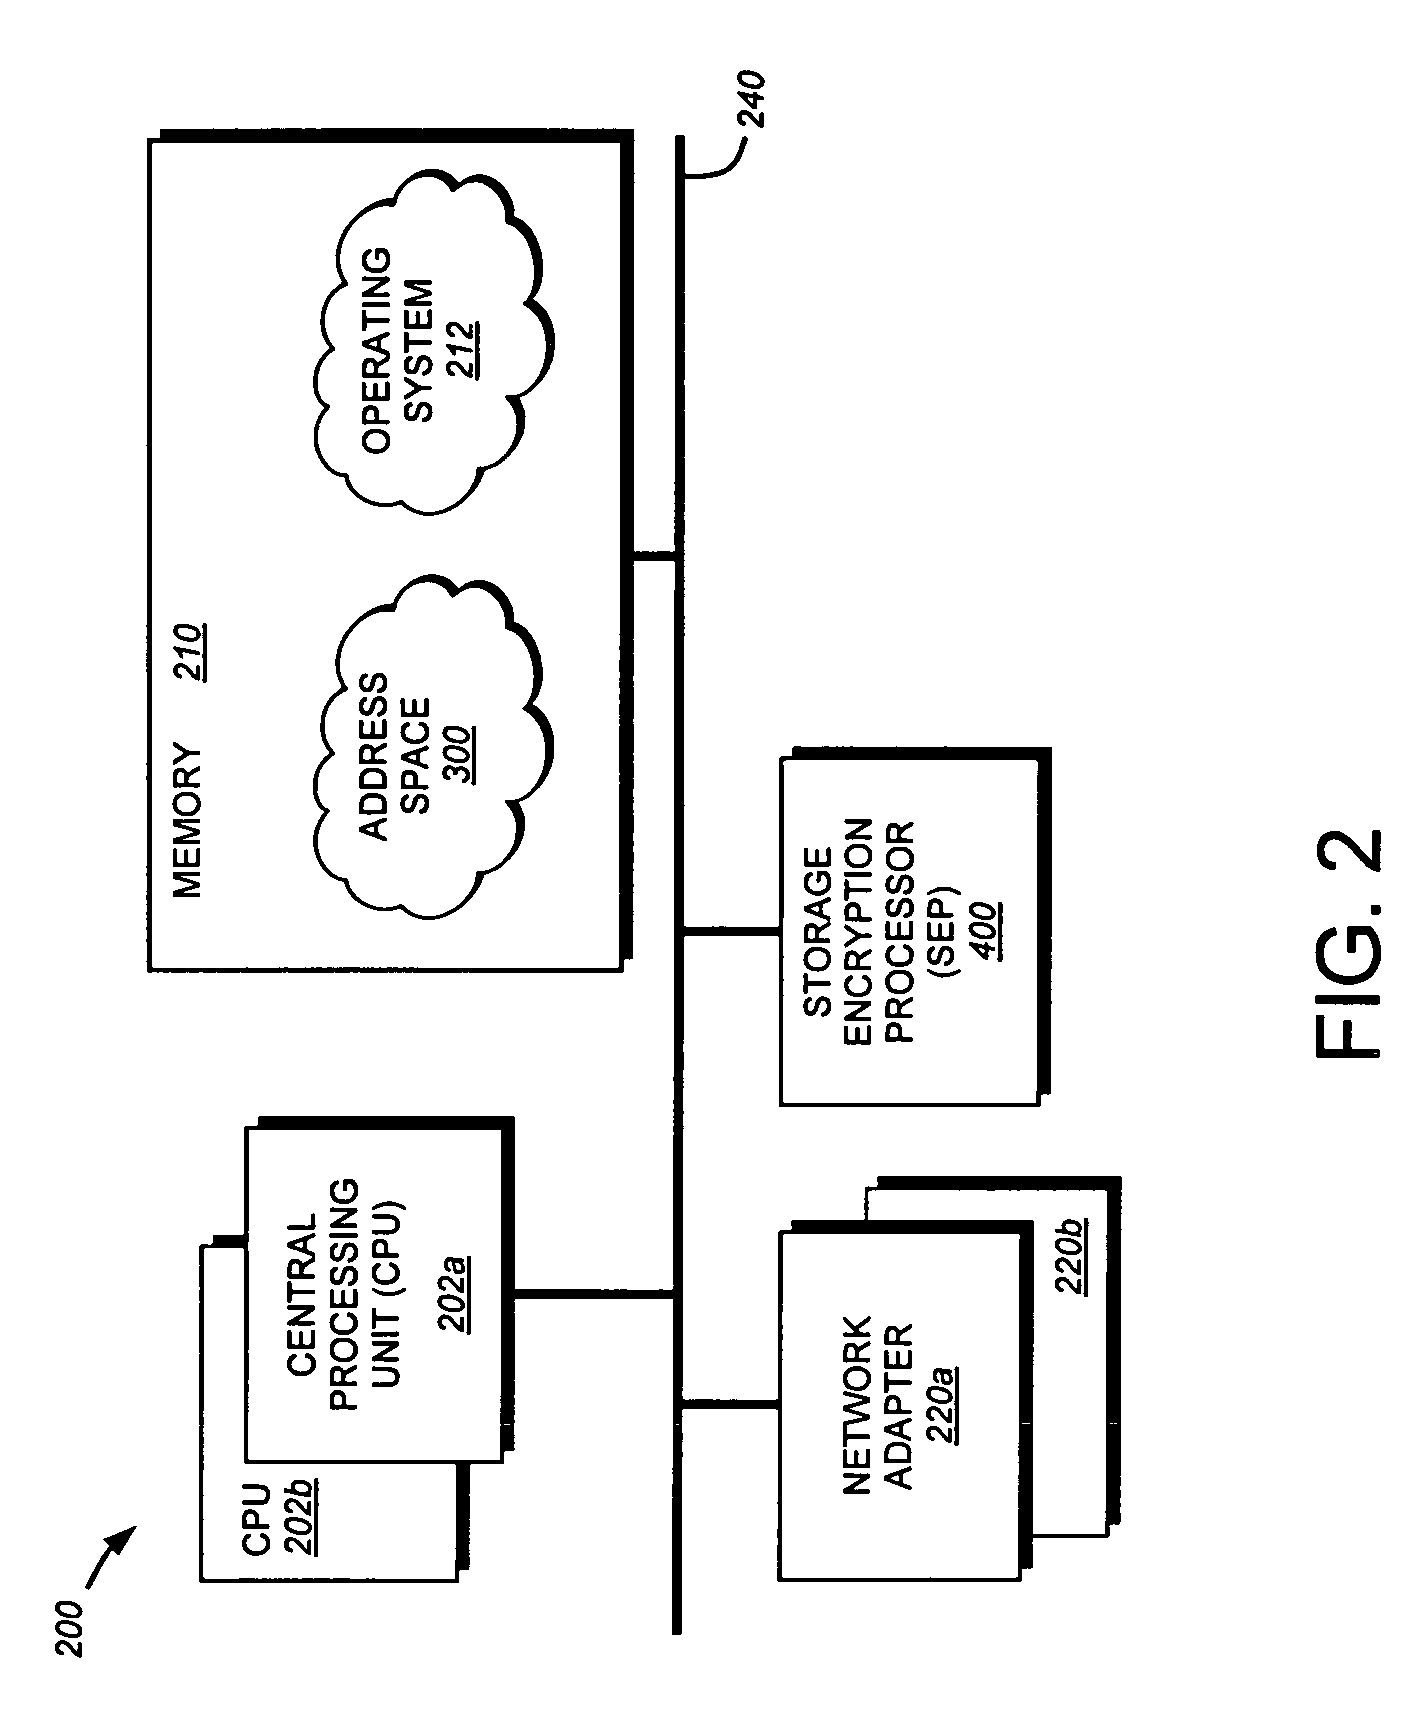 System and method for parallel compression of a single data stream